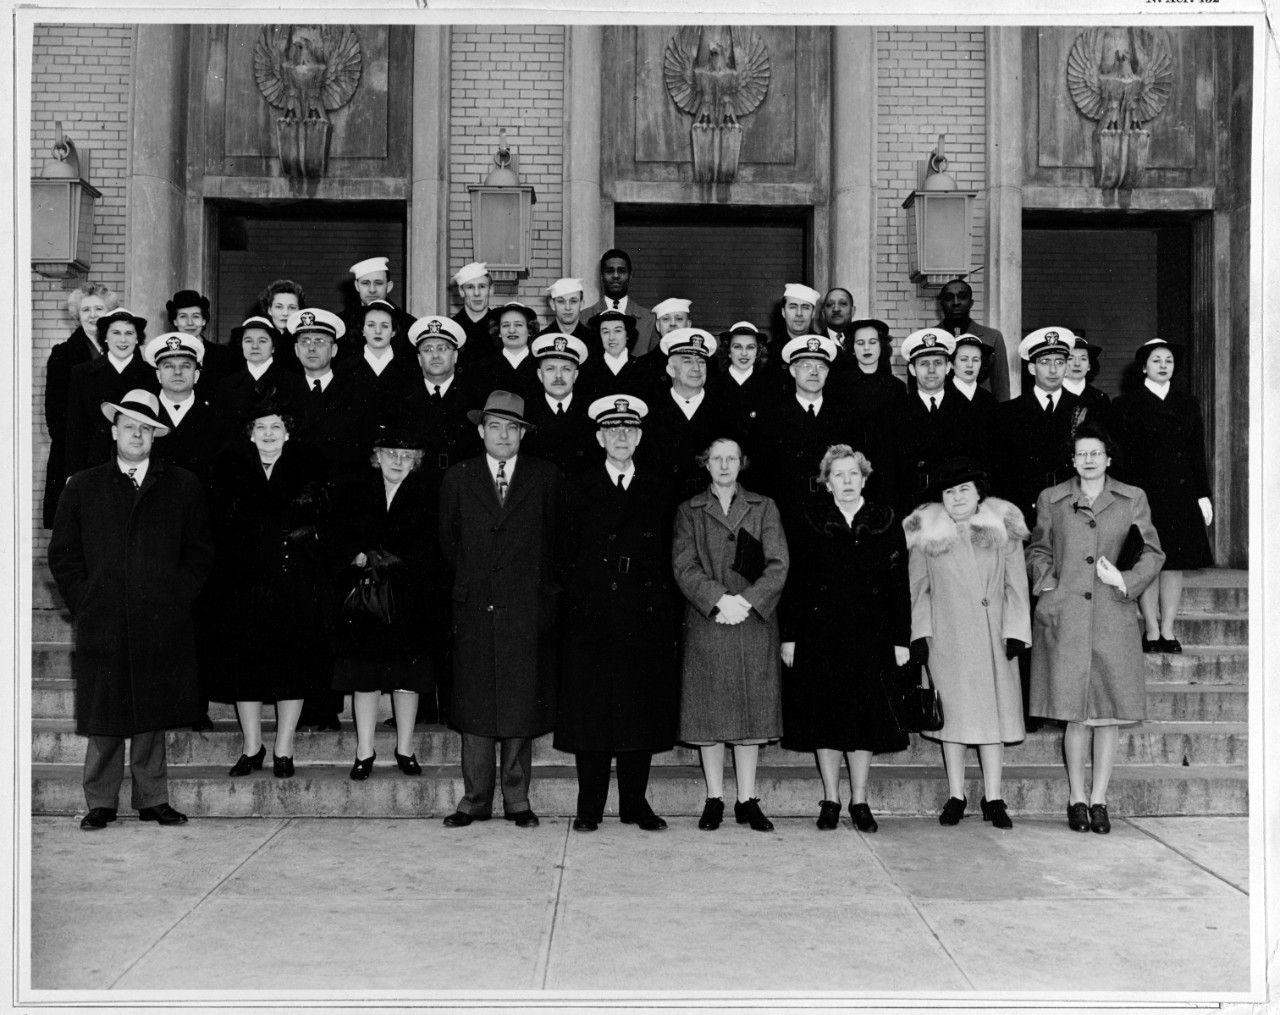 Group photograph of staff of Office of Naval Records and Library (Op-16-E), taken on the steps of the Arlington Navy Annex building, Arlington, Virginia, in April 1944. Front row, center, is Captain Dudley Knox, Officer in Charge.